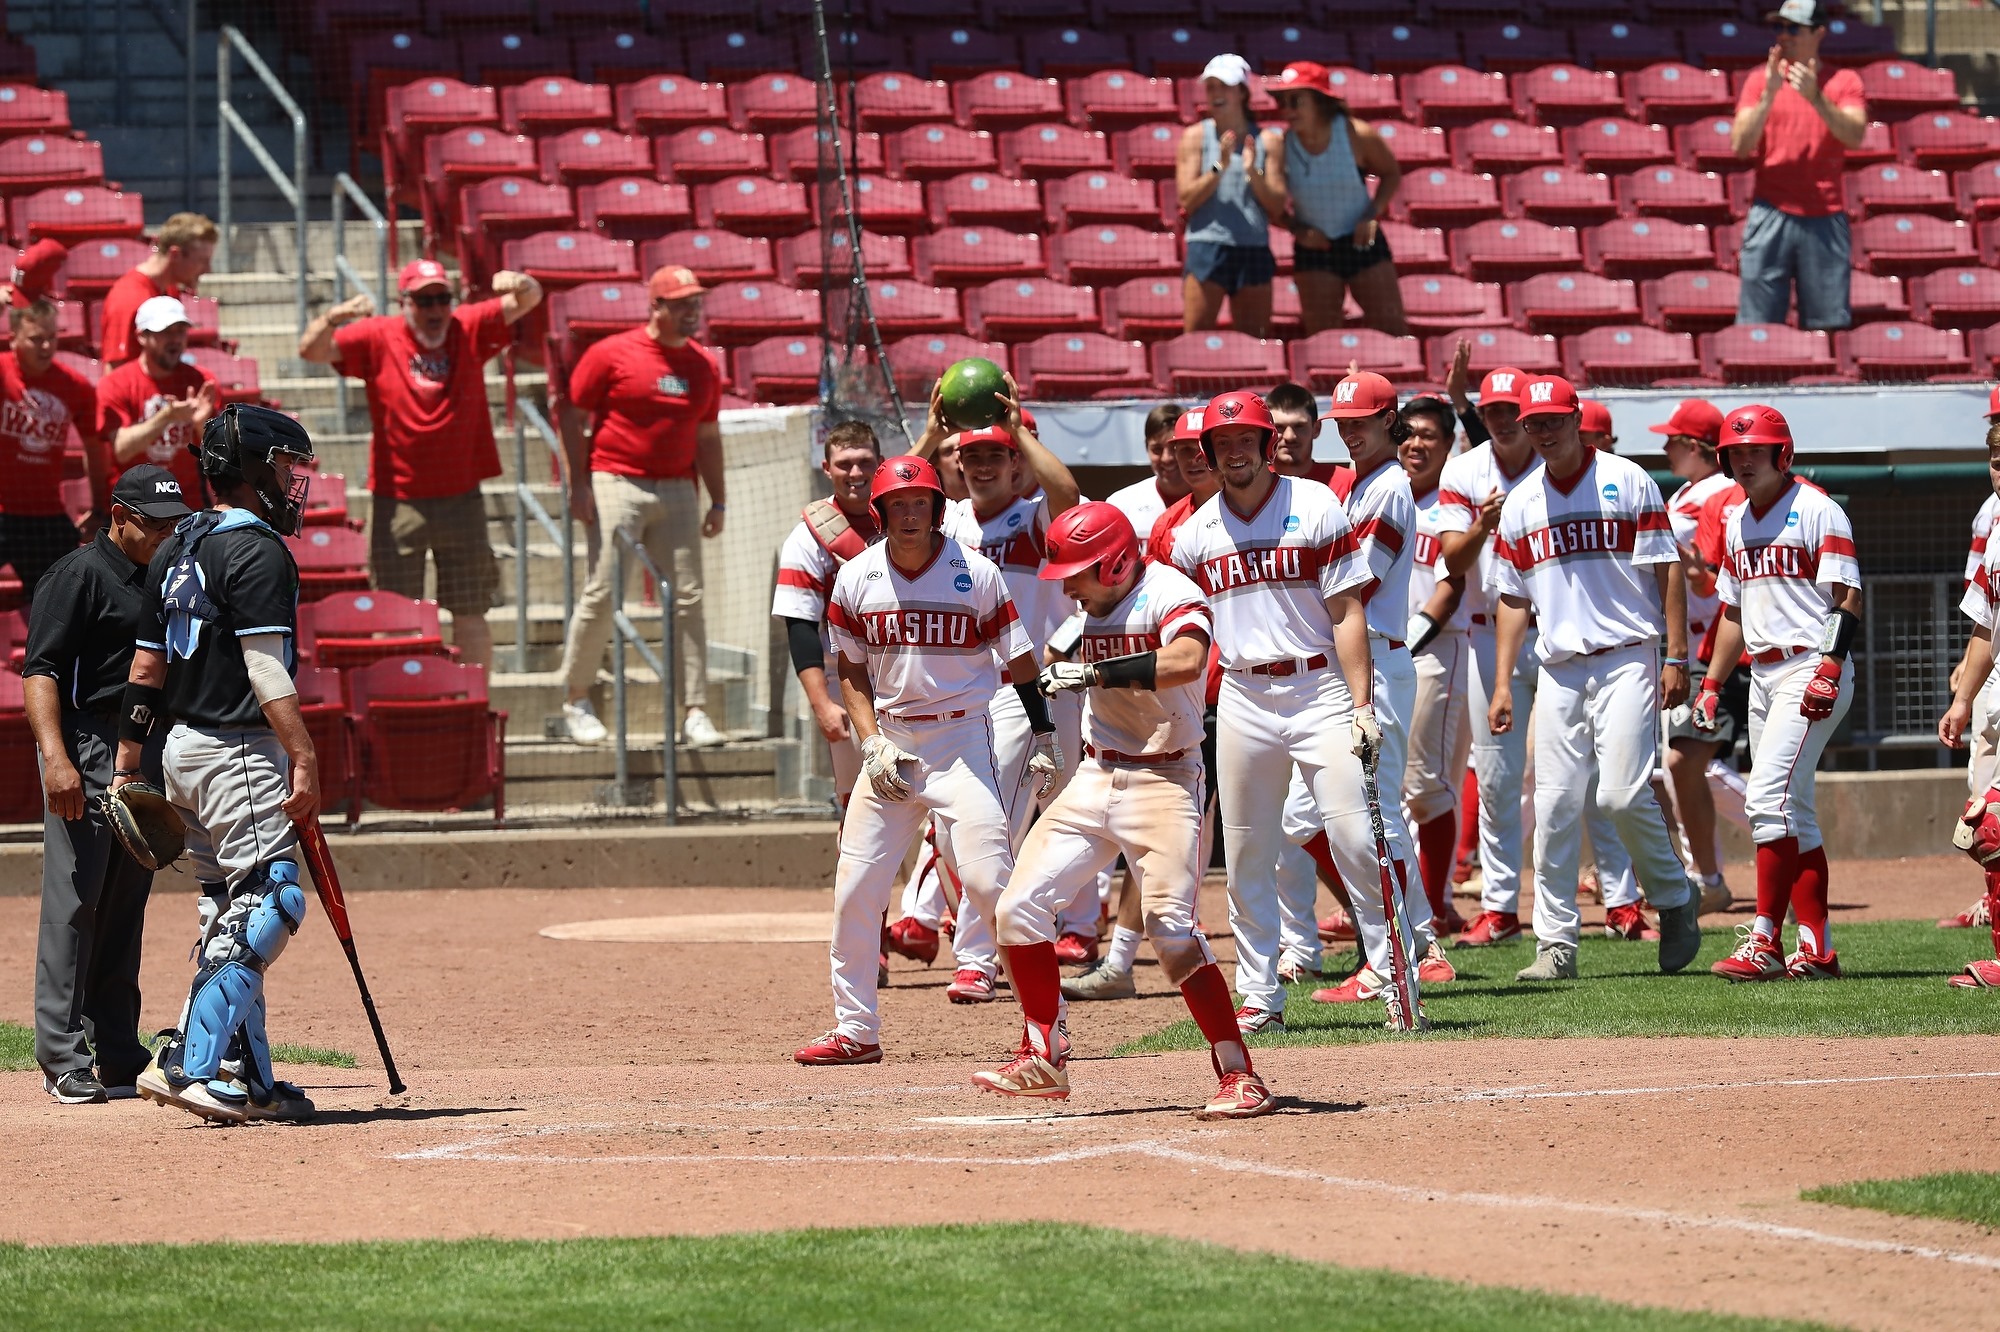 A crowd of baseball players lines up to greet a player with high red socks near home plate with red seats in the background.